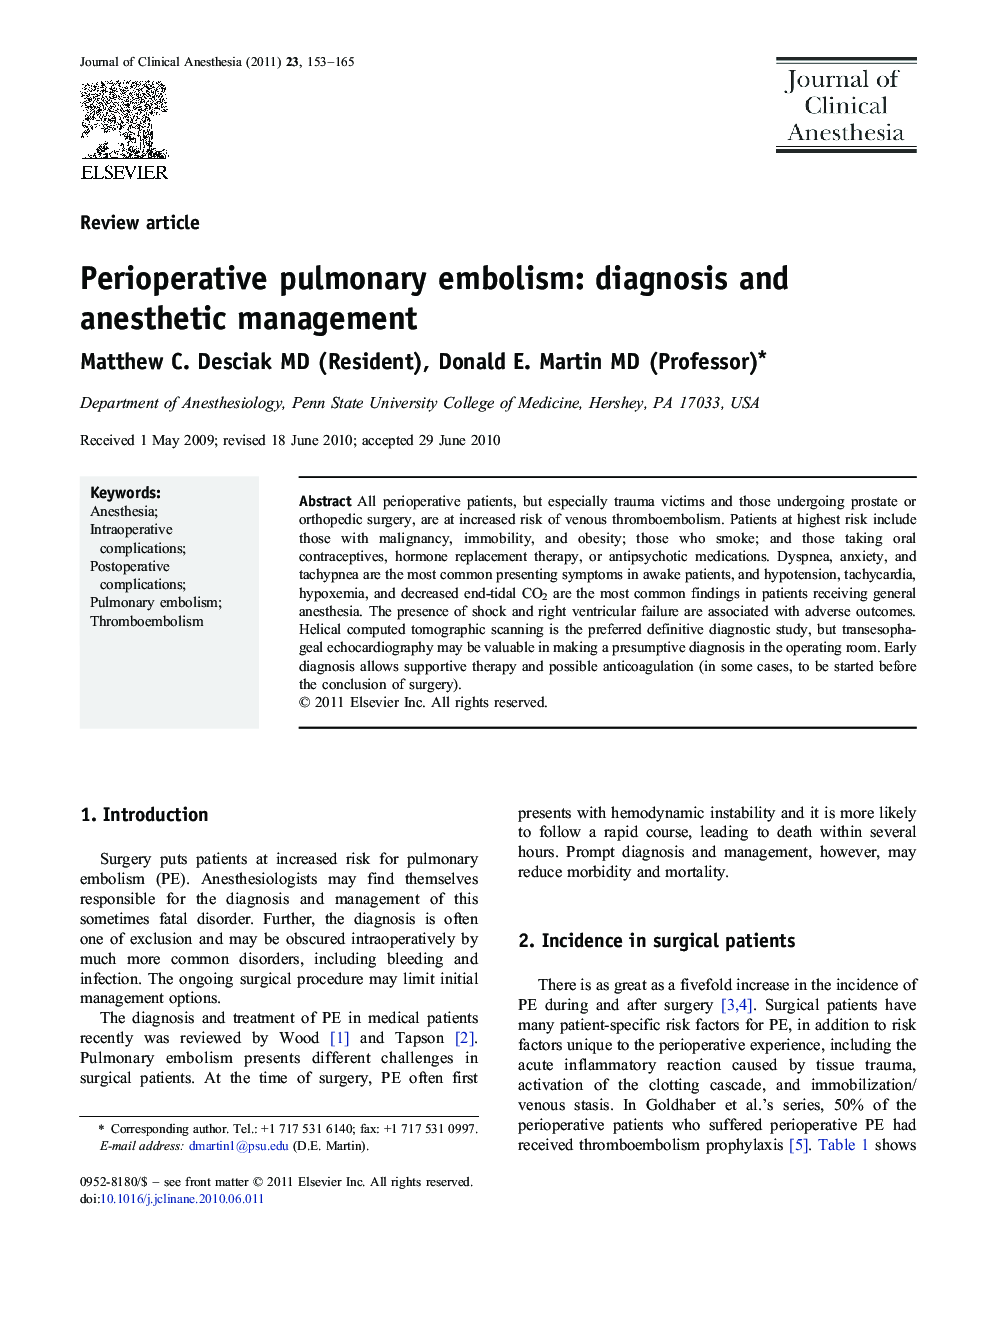 Perioperative pulmonary embolism: diagnosis and anesthetic management